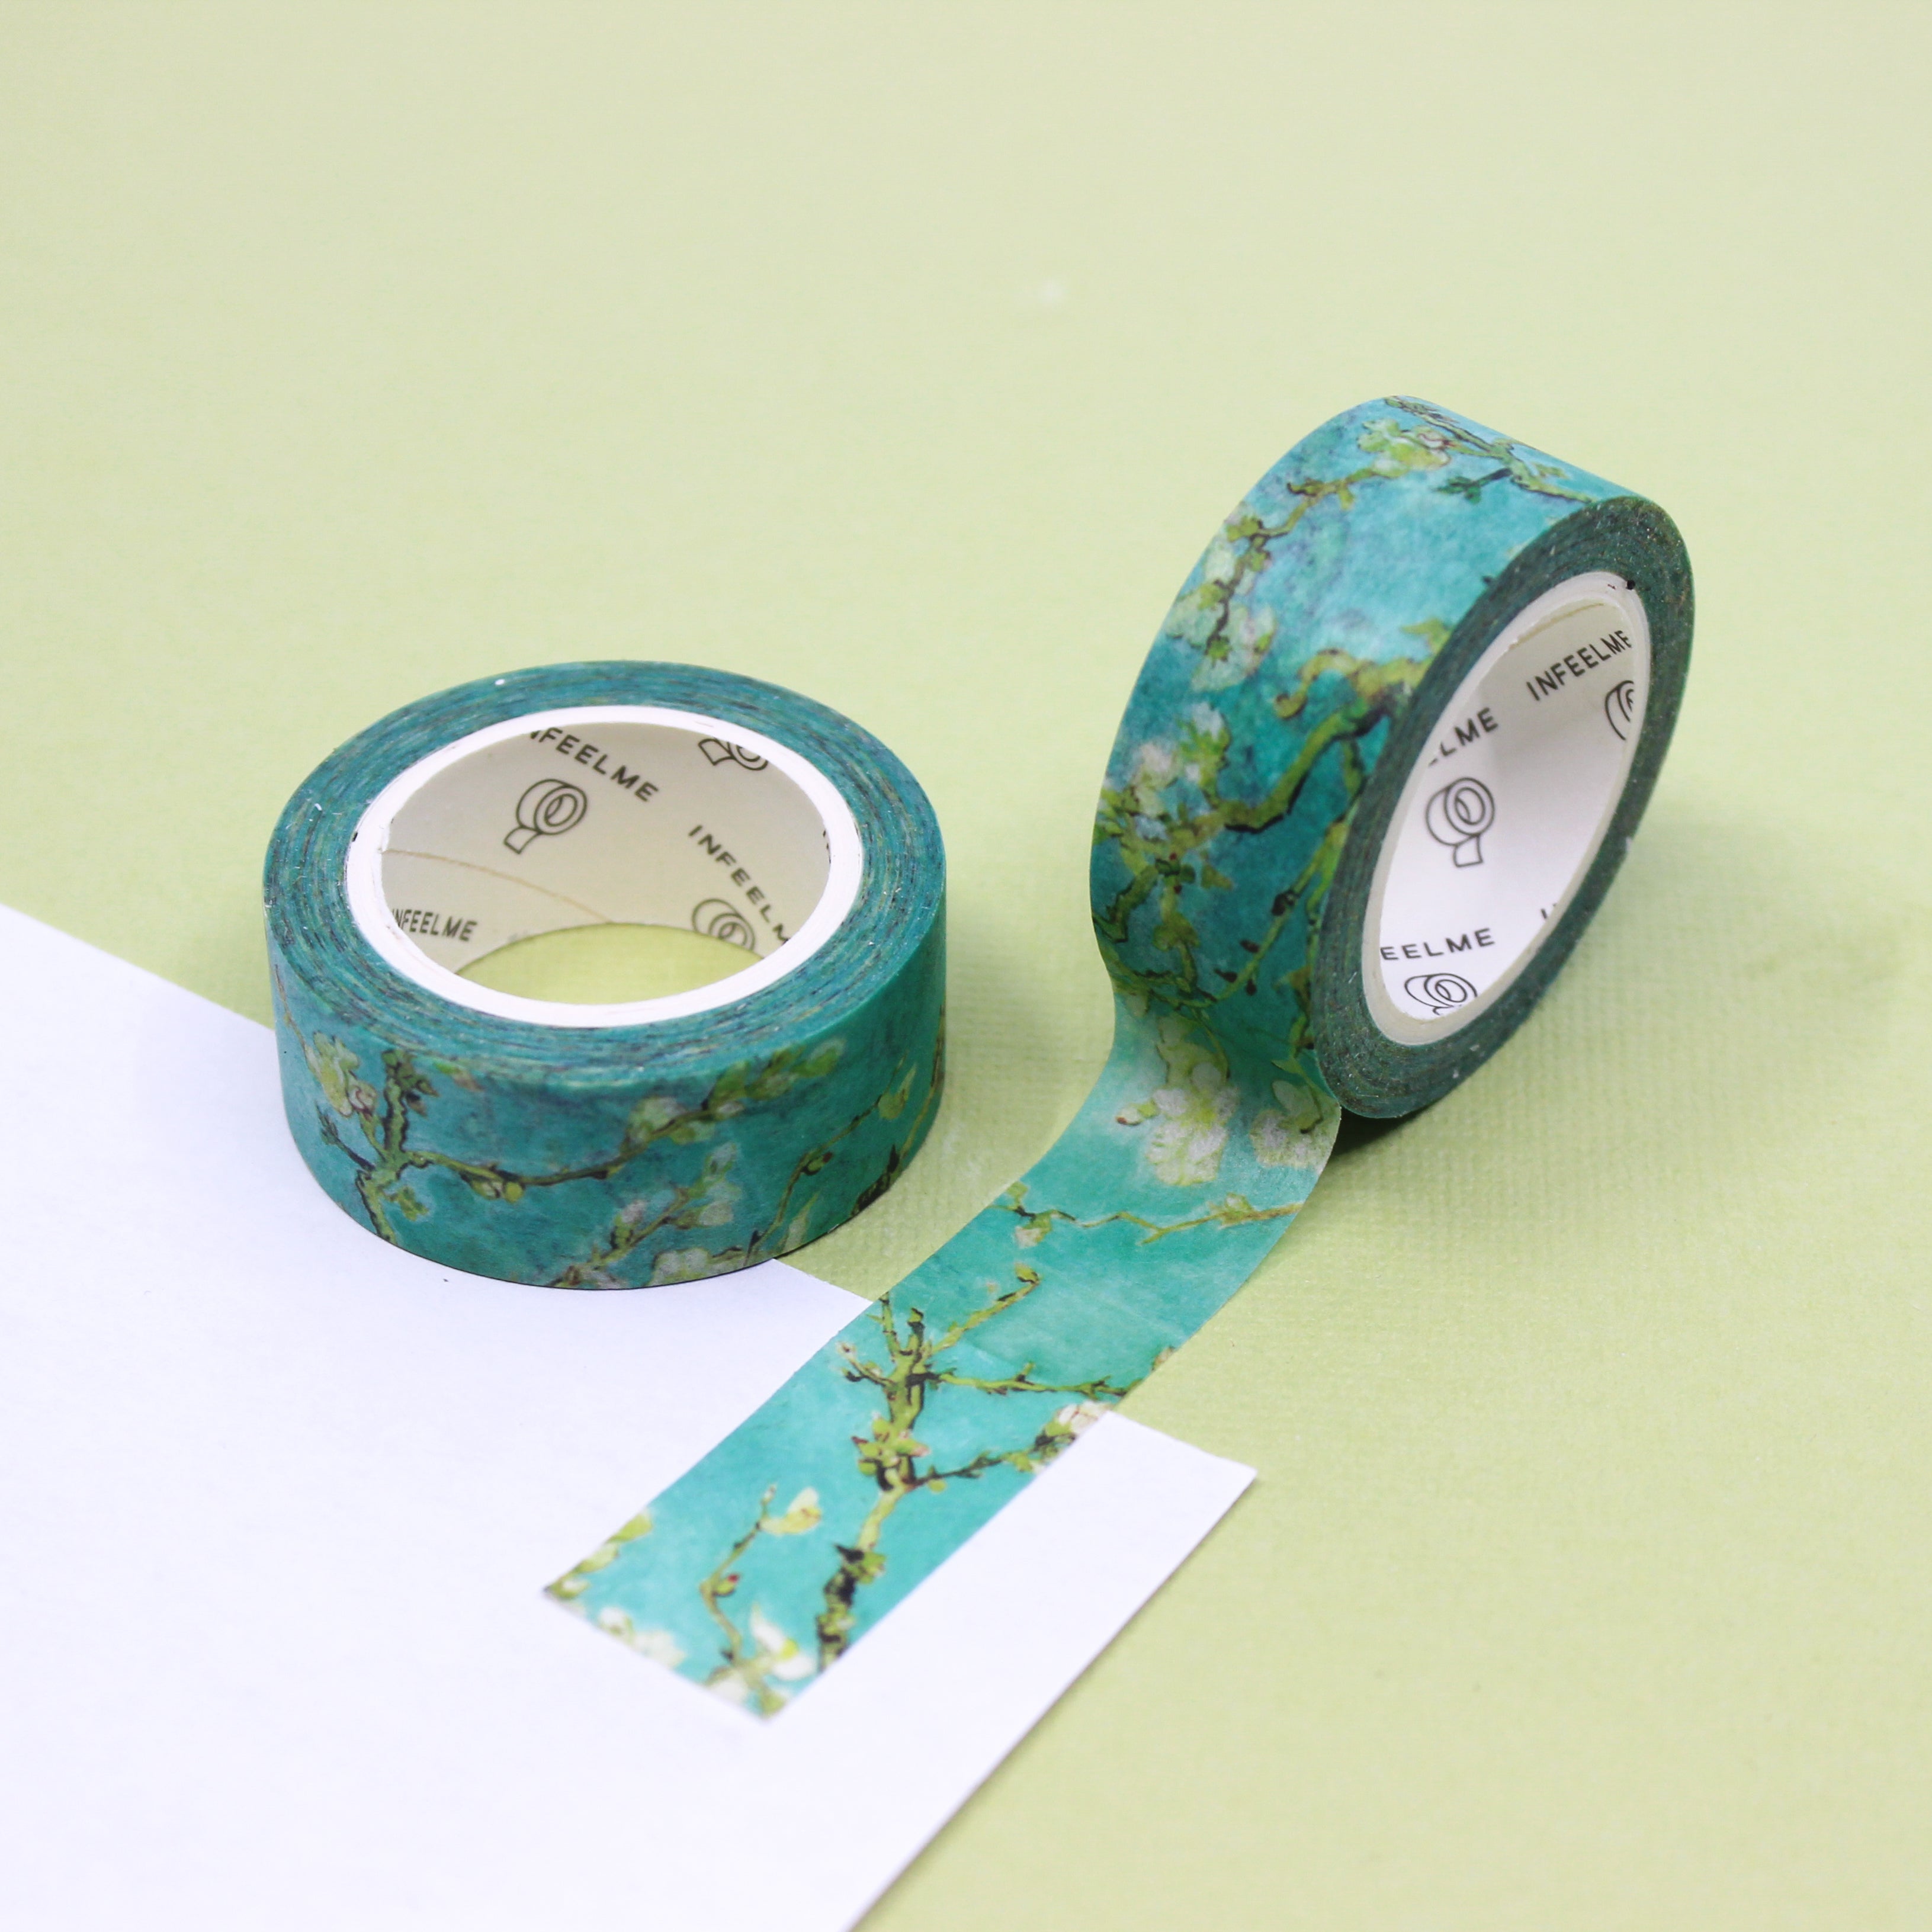 This pretty blue cherry Blossom floral tape is a vibrant floral pattern that is perfect for your BUJO and craft projects. Spring is in the air with this gorgeous tape. This tape is reminiscent of Van Gogh's Cherry Blossoms.